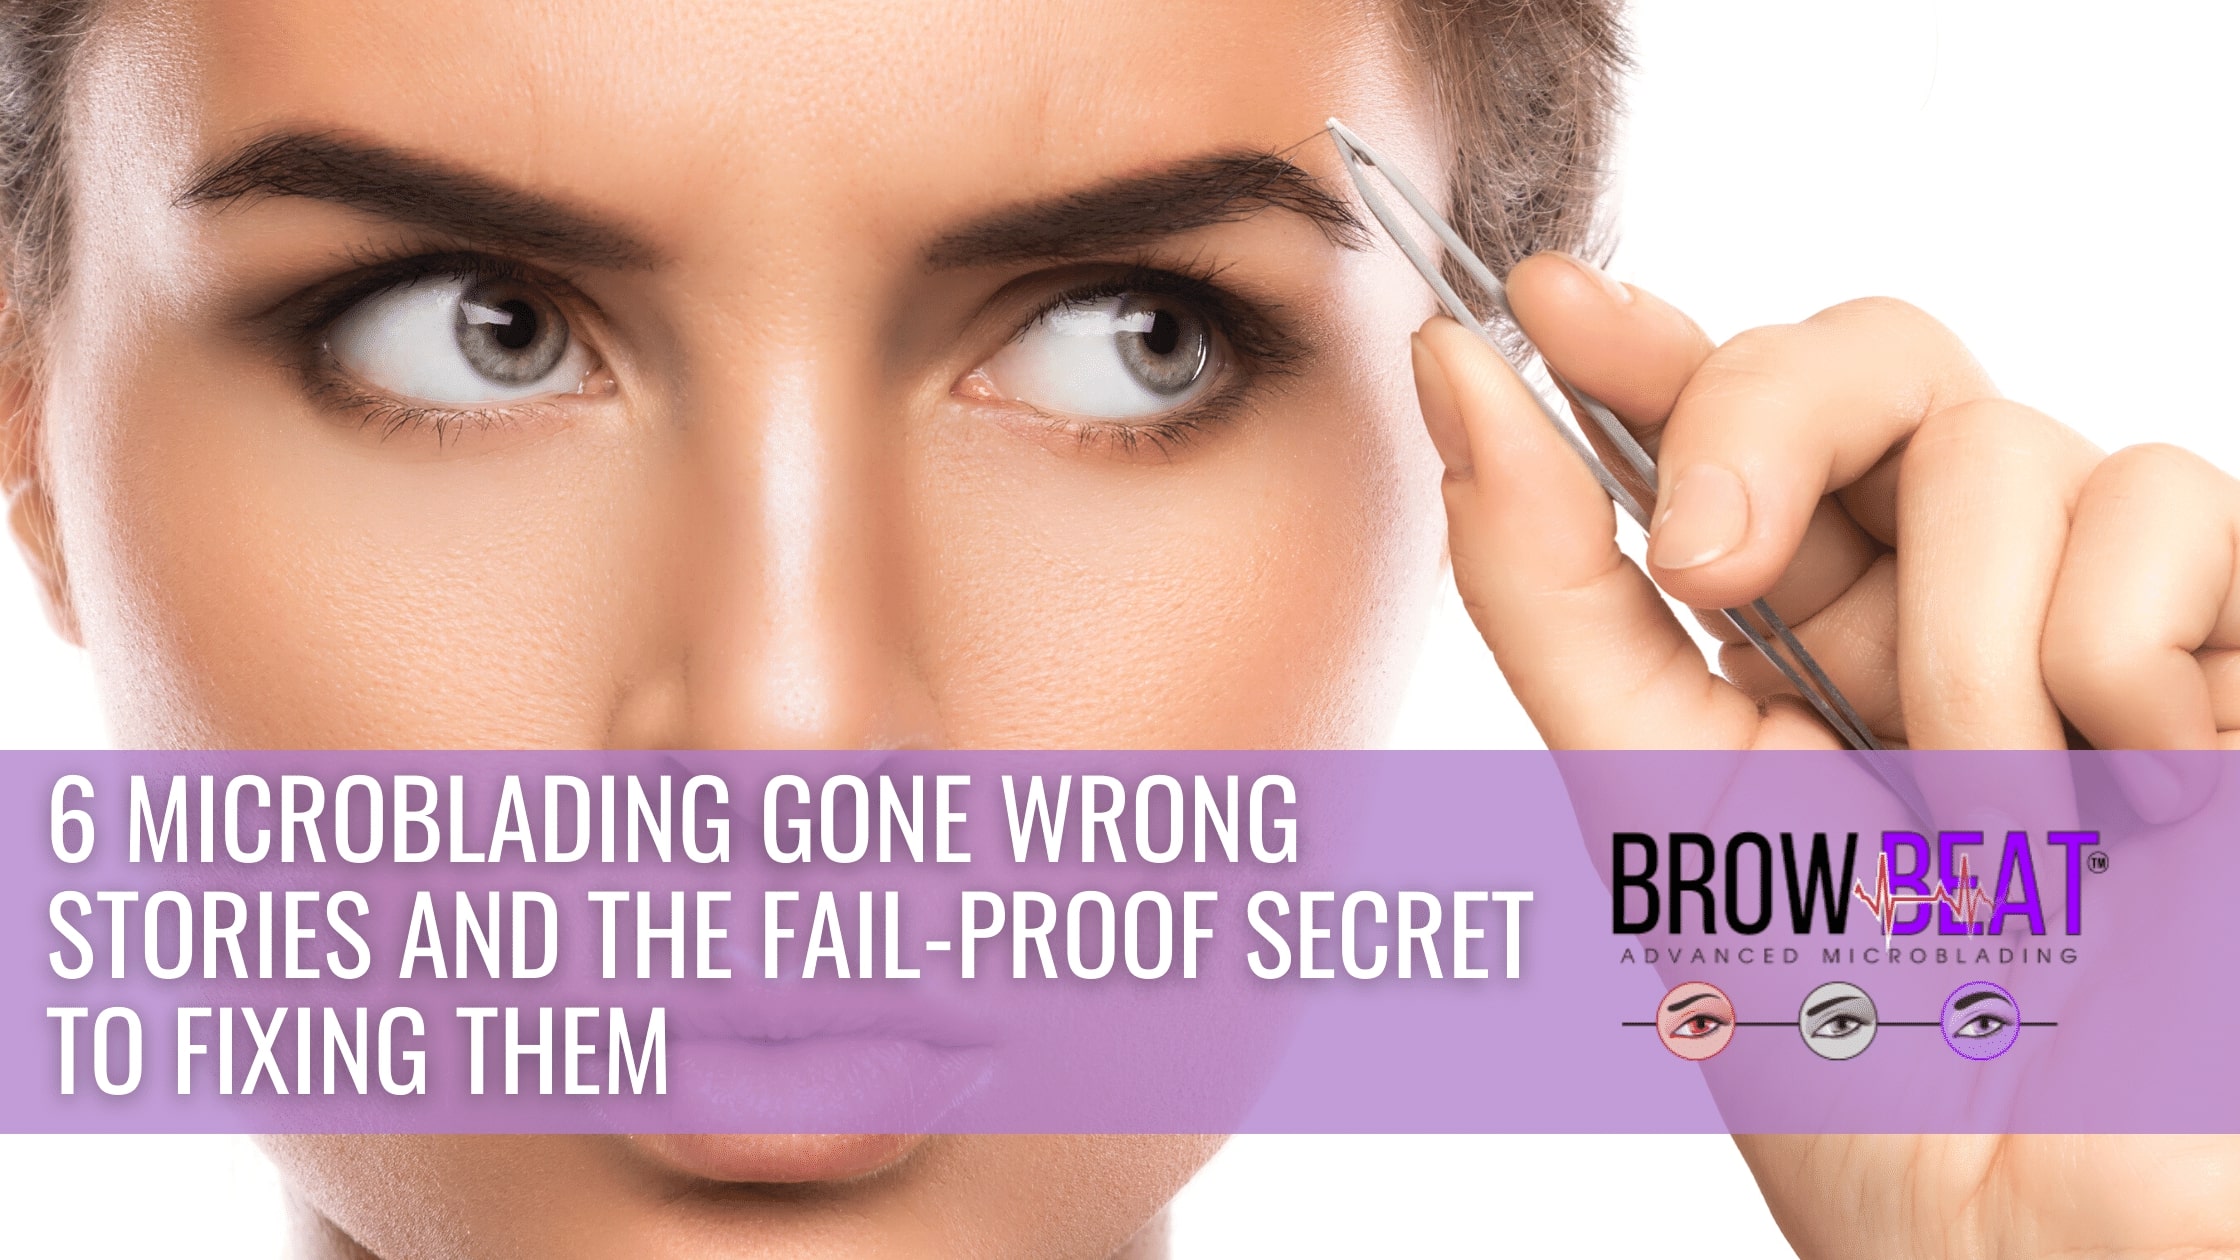 6 Microblading Gone Wrong Stories and The Fail-proof Secret to Fixing Them